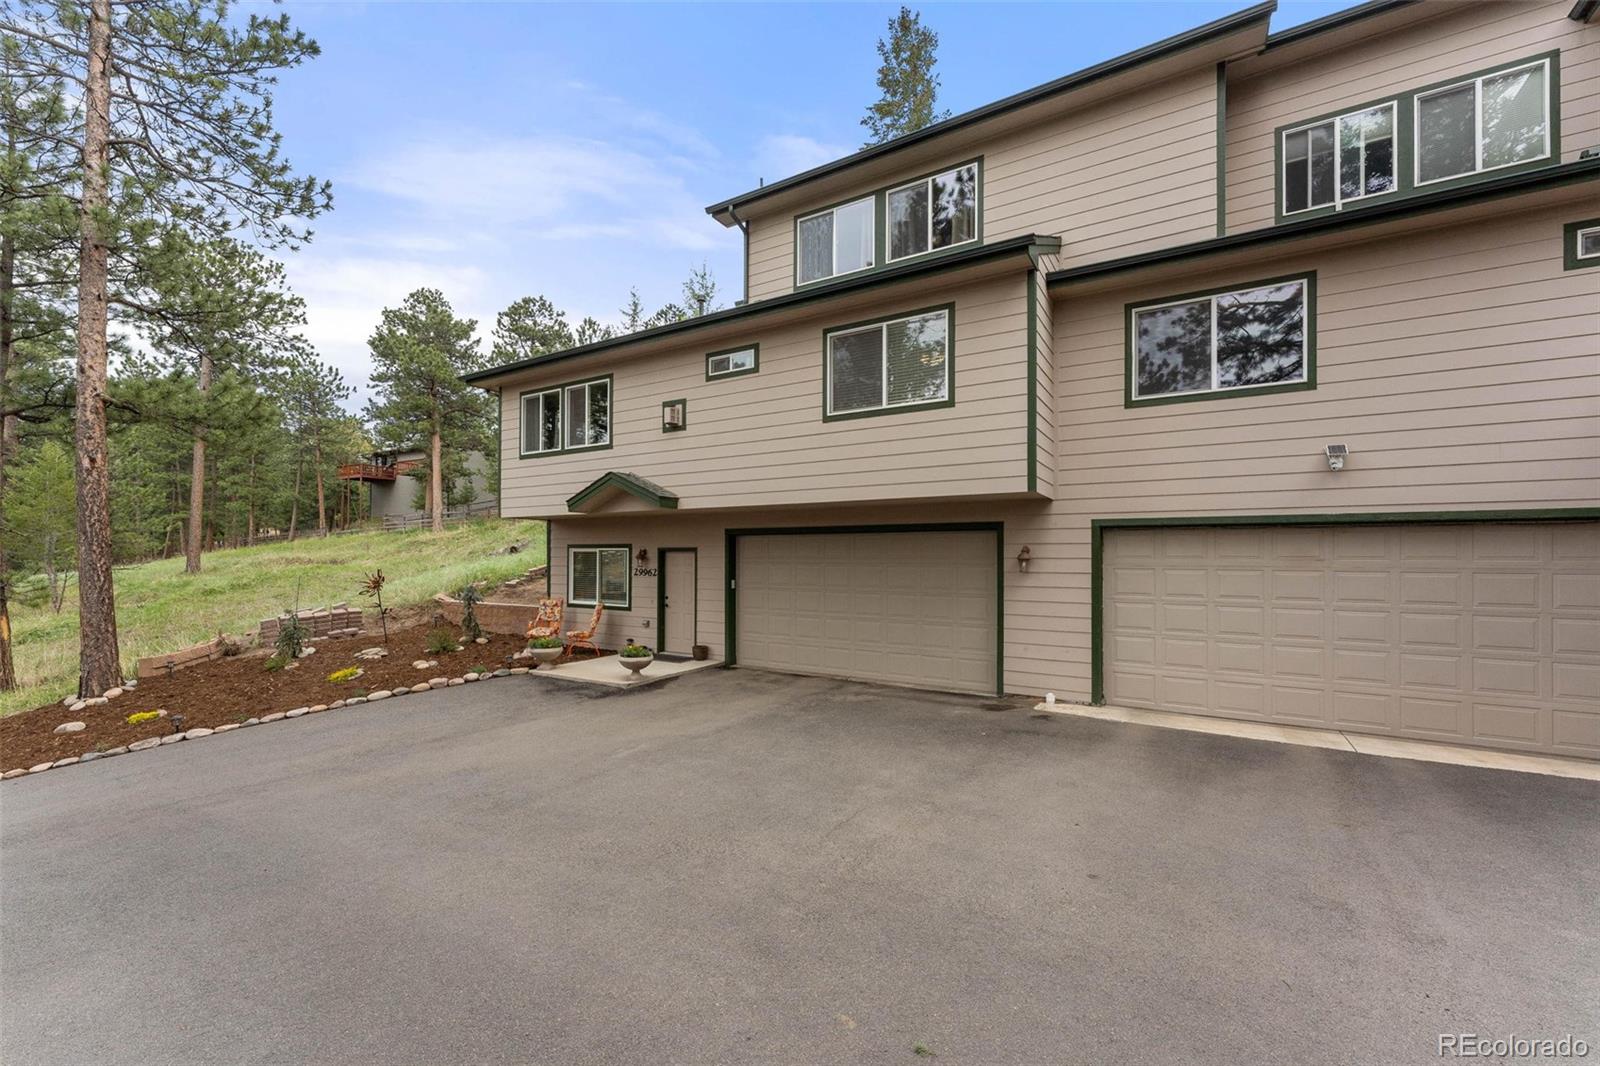 29962 Spruce Road, Evergreen, CO 80439 - #: 6474384